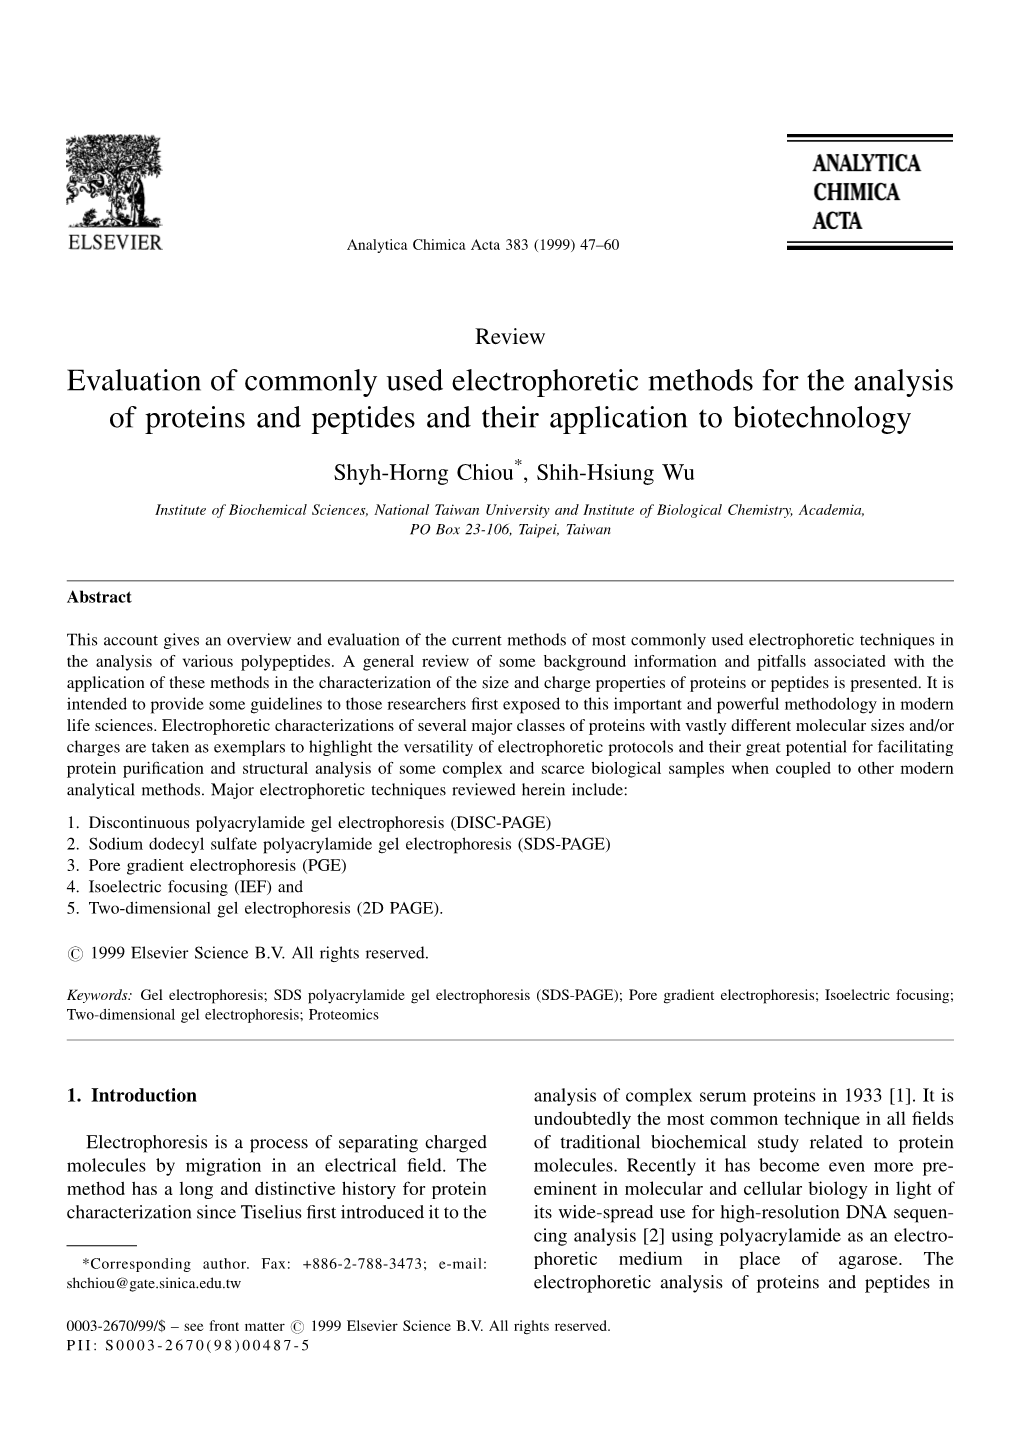 Evaluation of Commonly Used Electrophoretic Methods for the Analysis of Proteins and Peptides and Their Application to Biotechnology